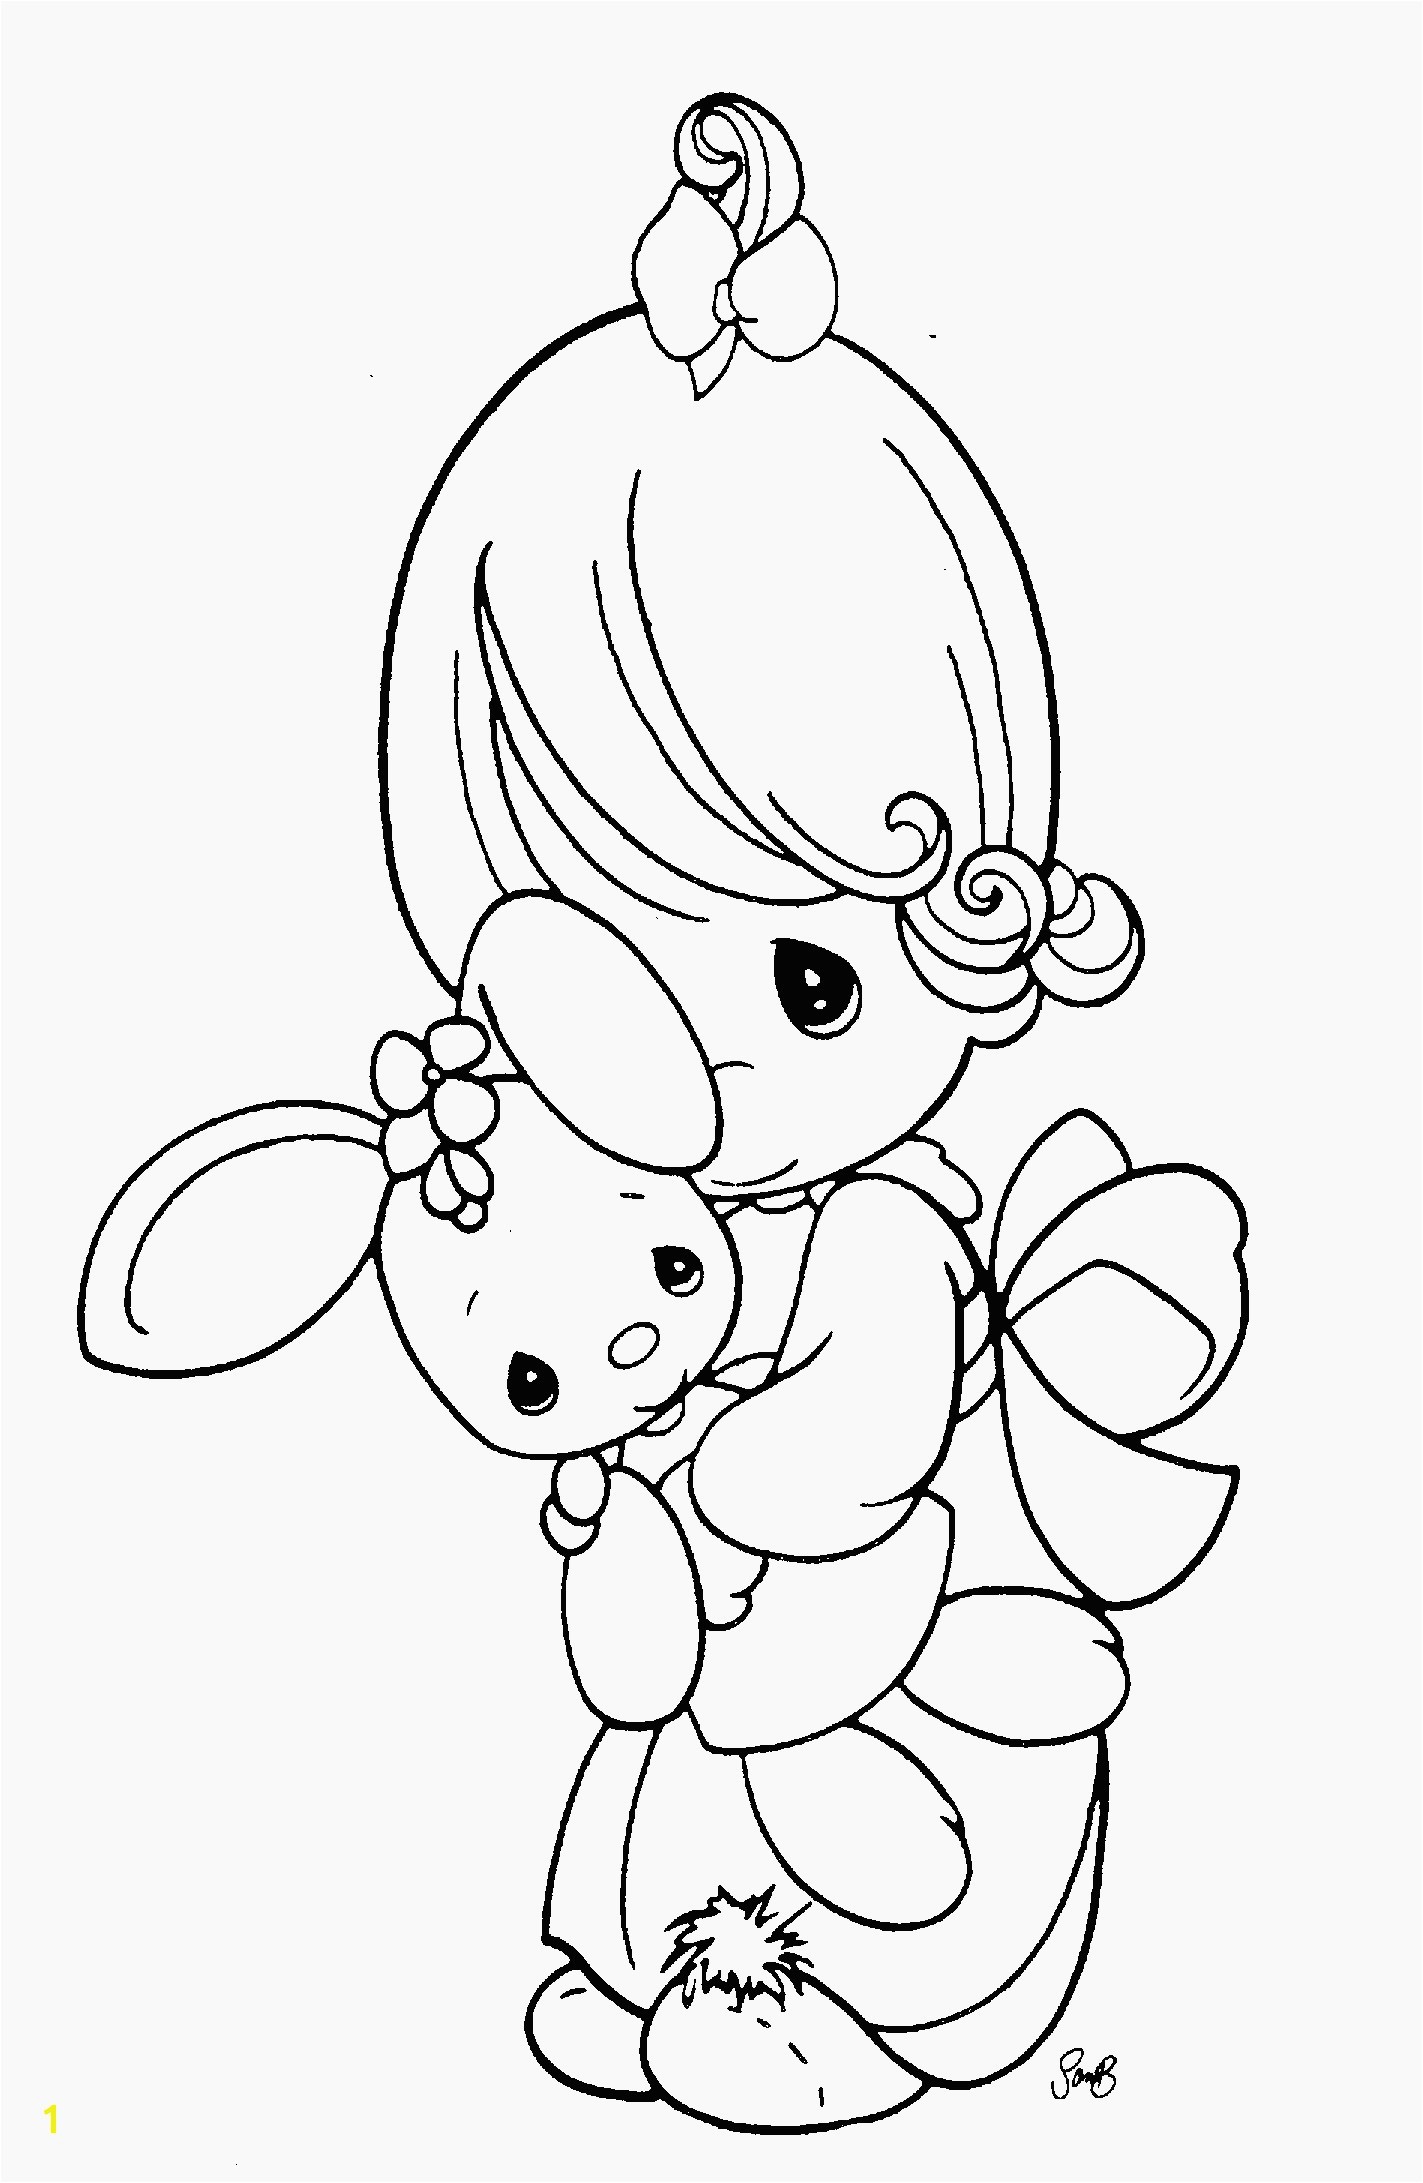 Precious Moments Coloring Pages Pdf 12 Fresh My Precious Moments Coloring Pages